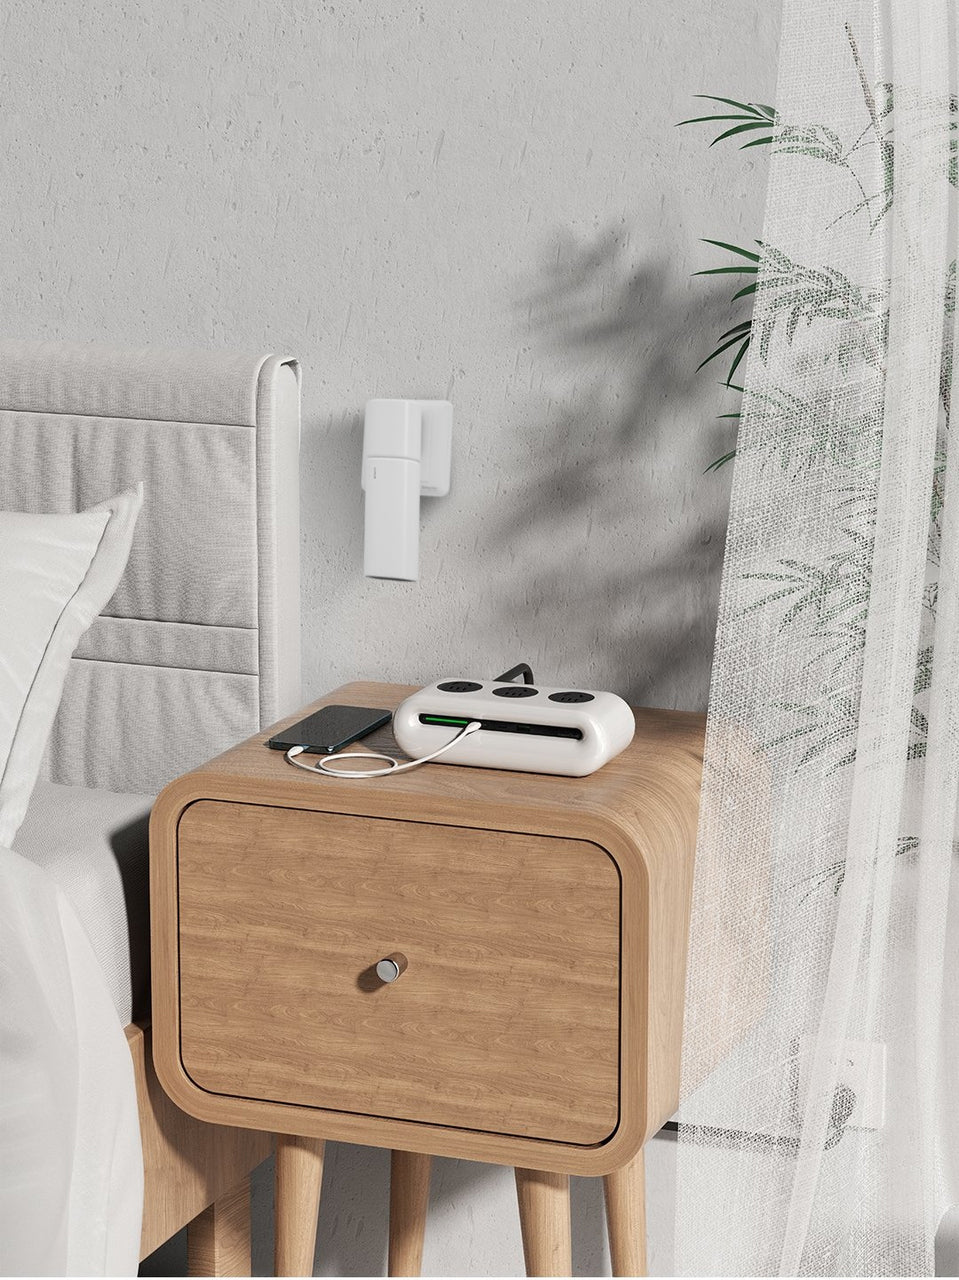 iSwift PowerCloud Desktop Charging Station and Power Strip